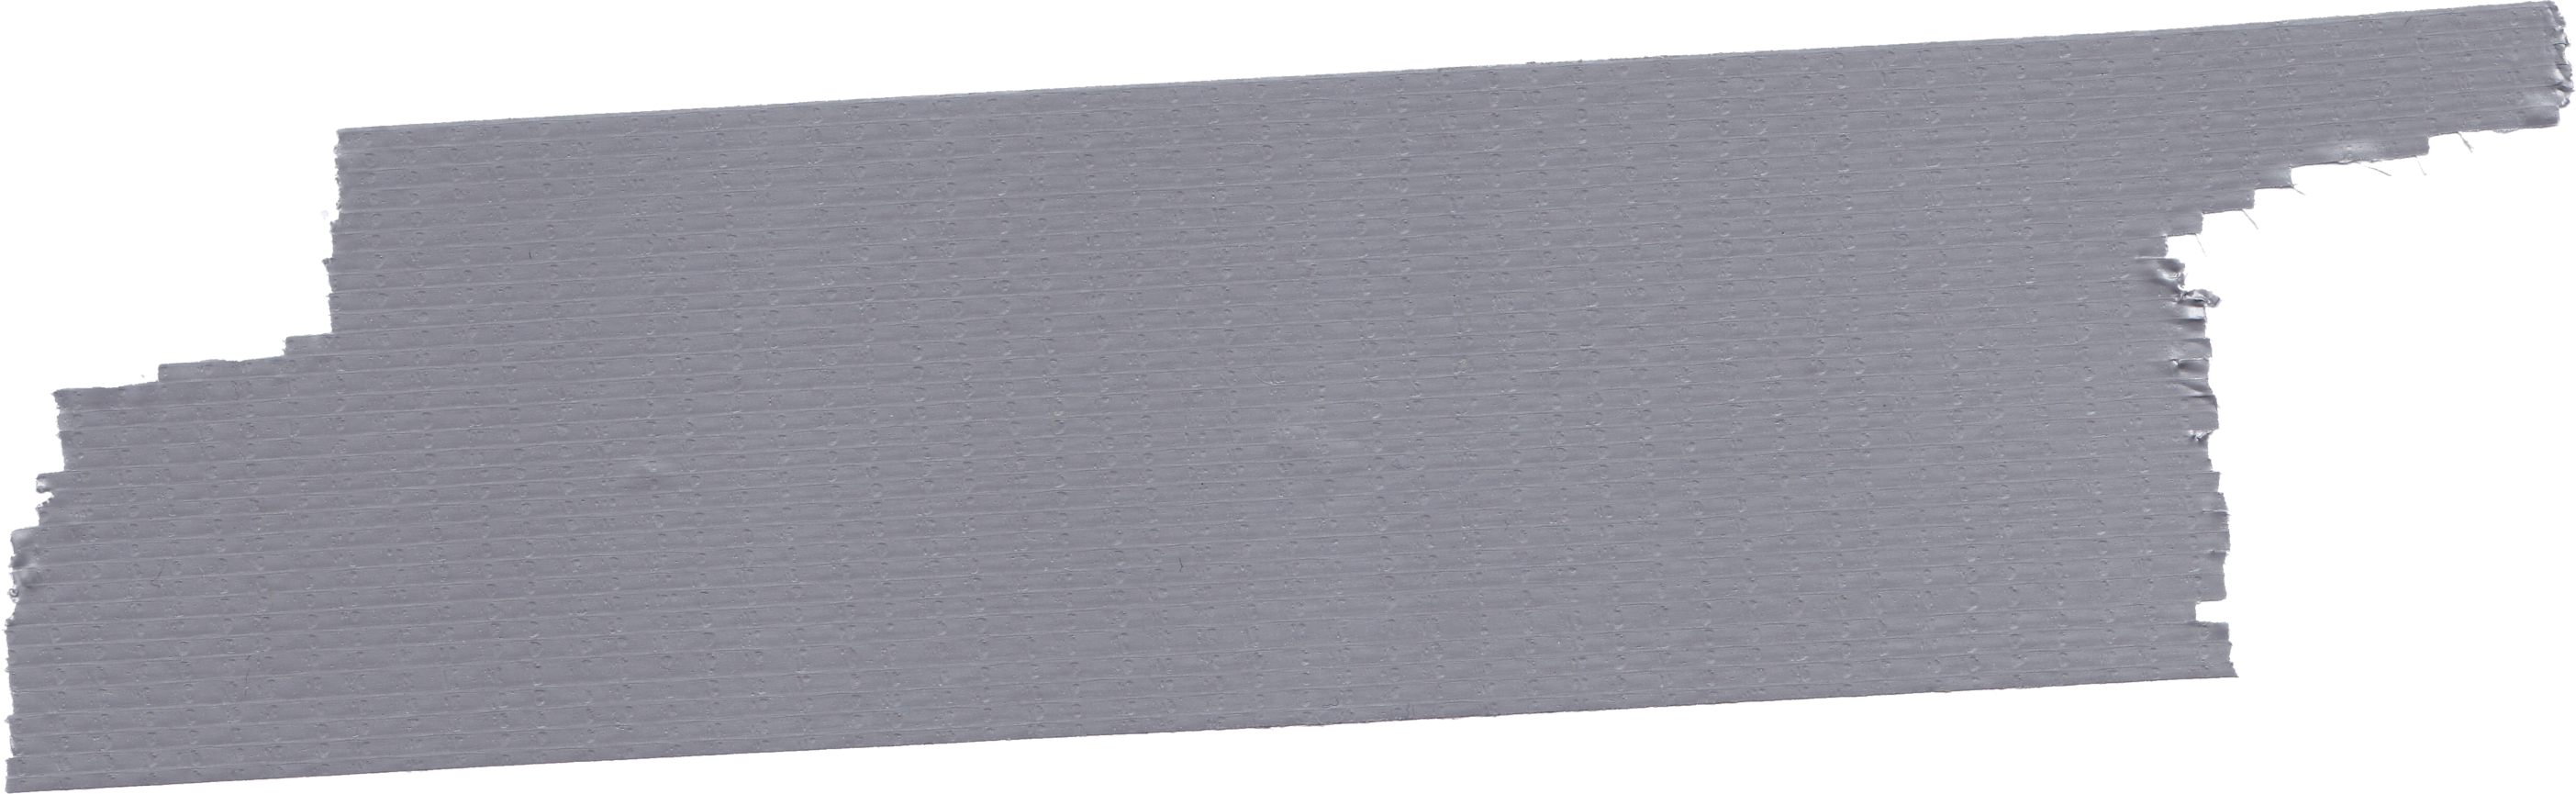 Duct Tape PNG Clipart